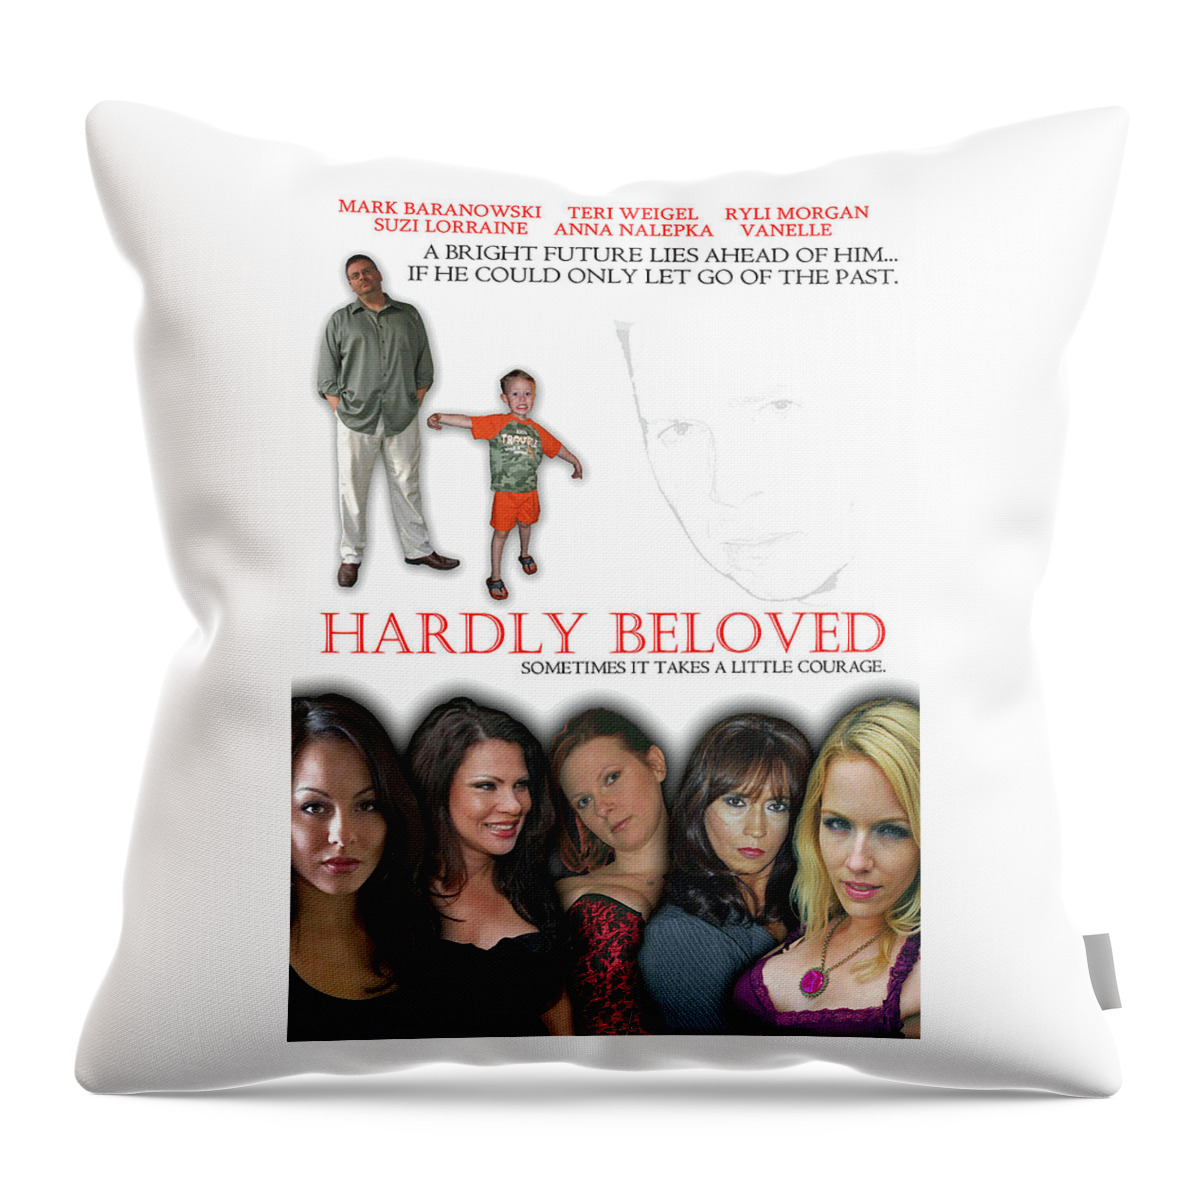 Movie Throw Pillow featuring the digital art Hardly Beloved Poster by Mark Baranowski